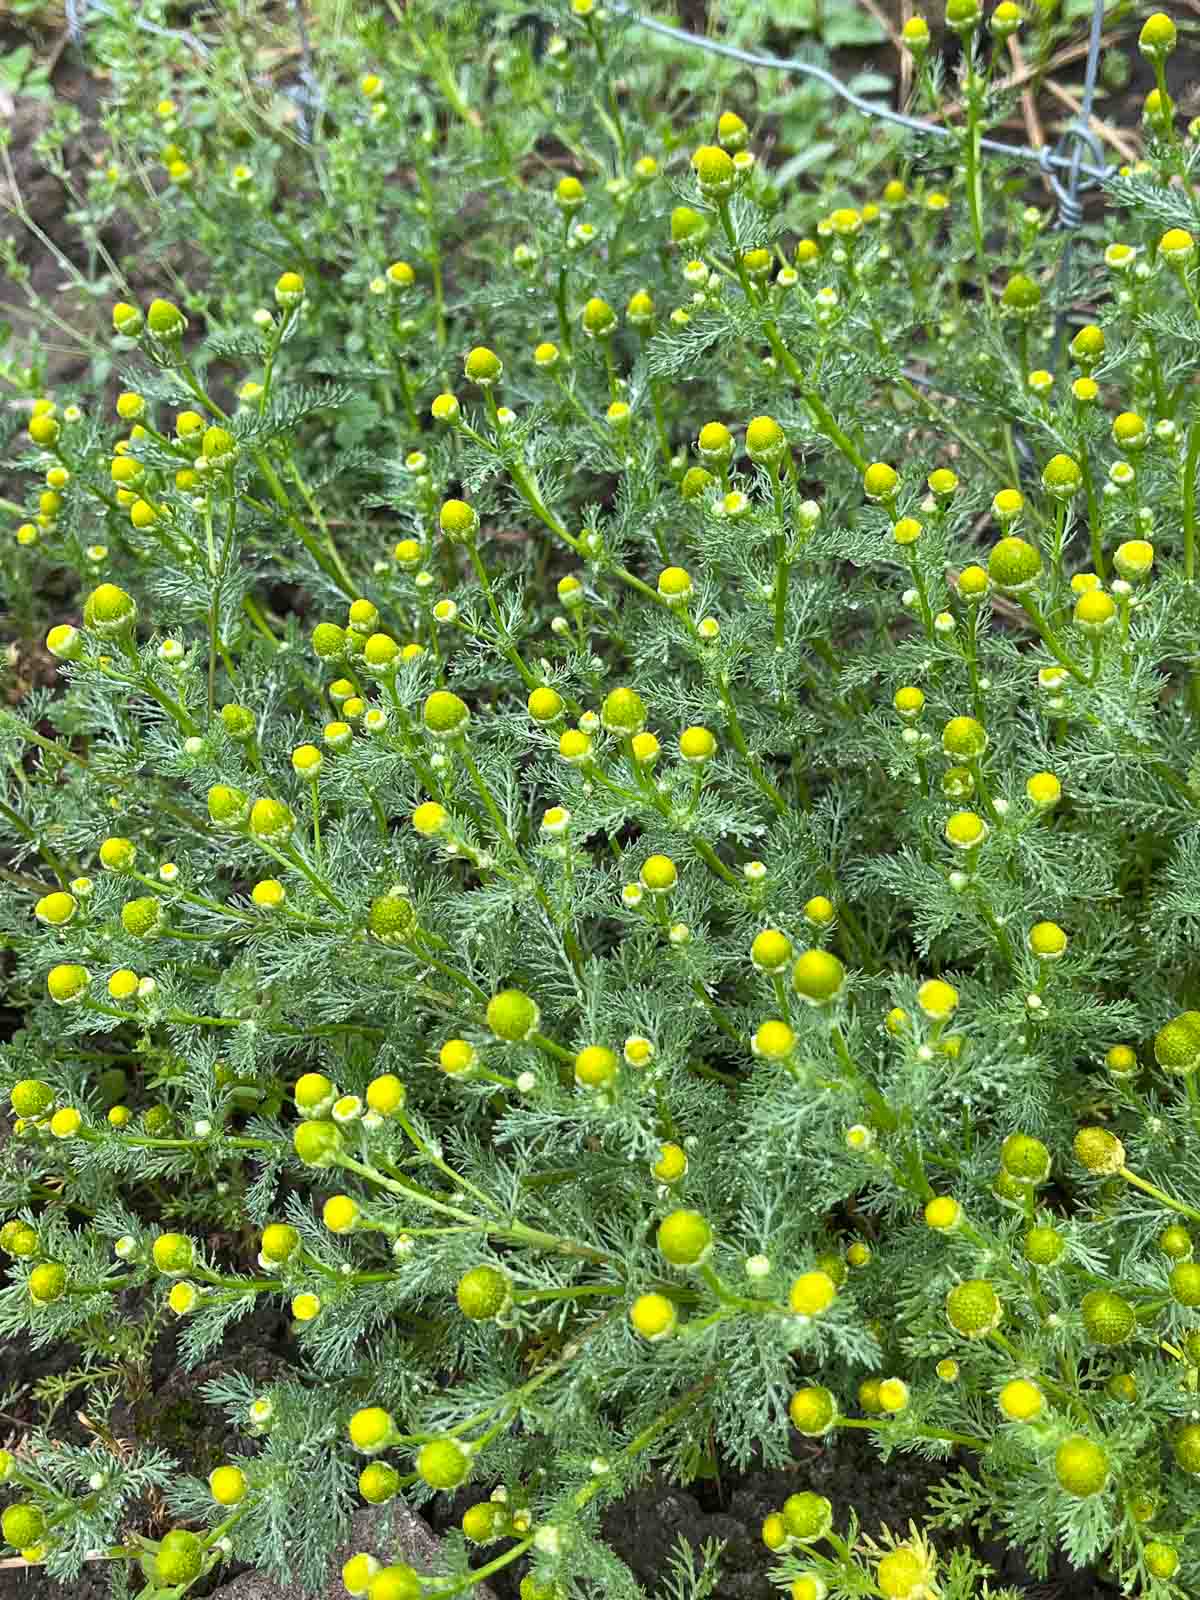 pineapple weed plant